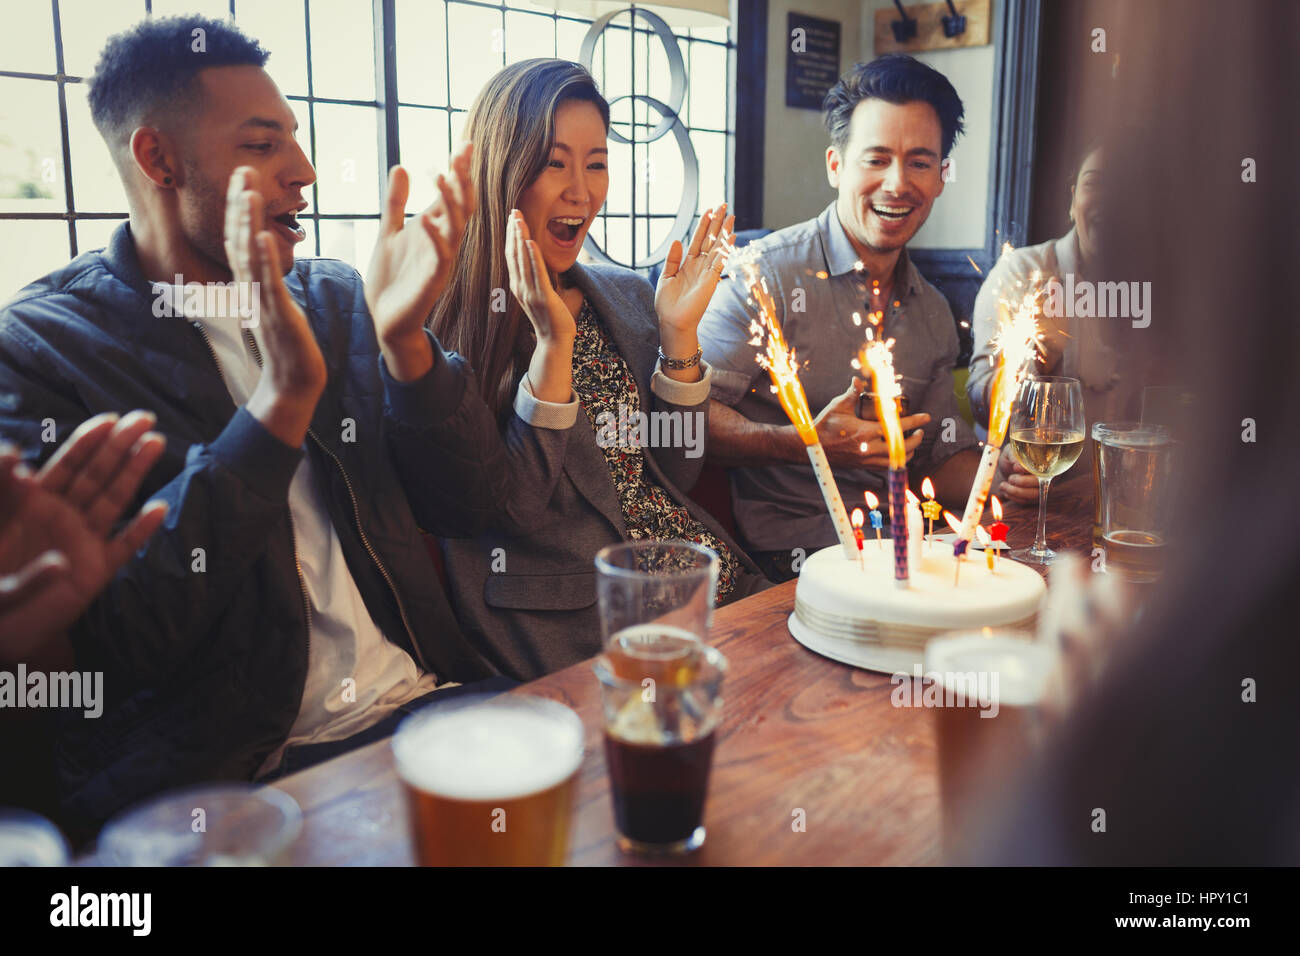 Friends cheering for woman celebrating birthday with fireworks cake at table in bar Stock Photo